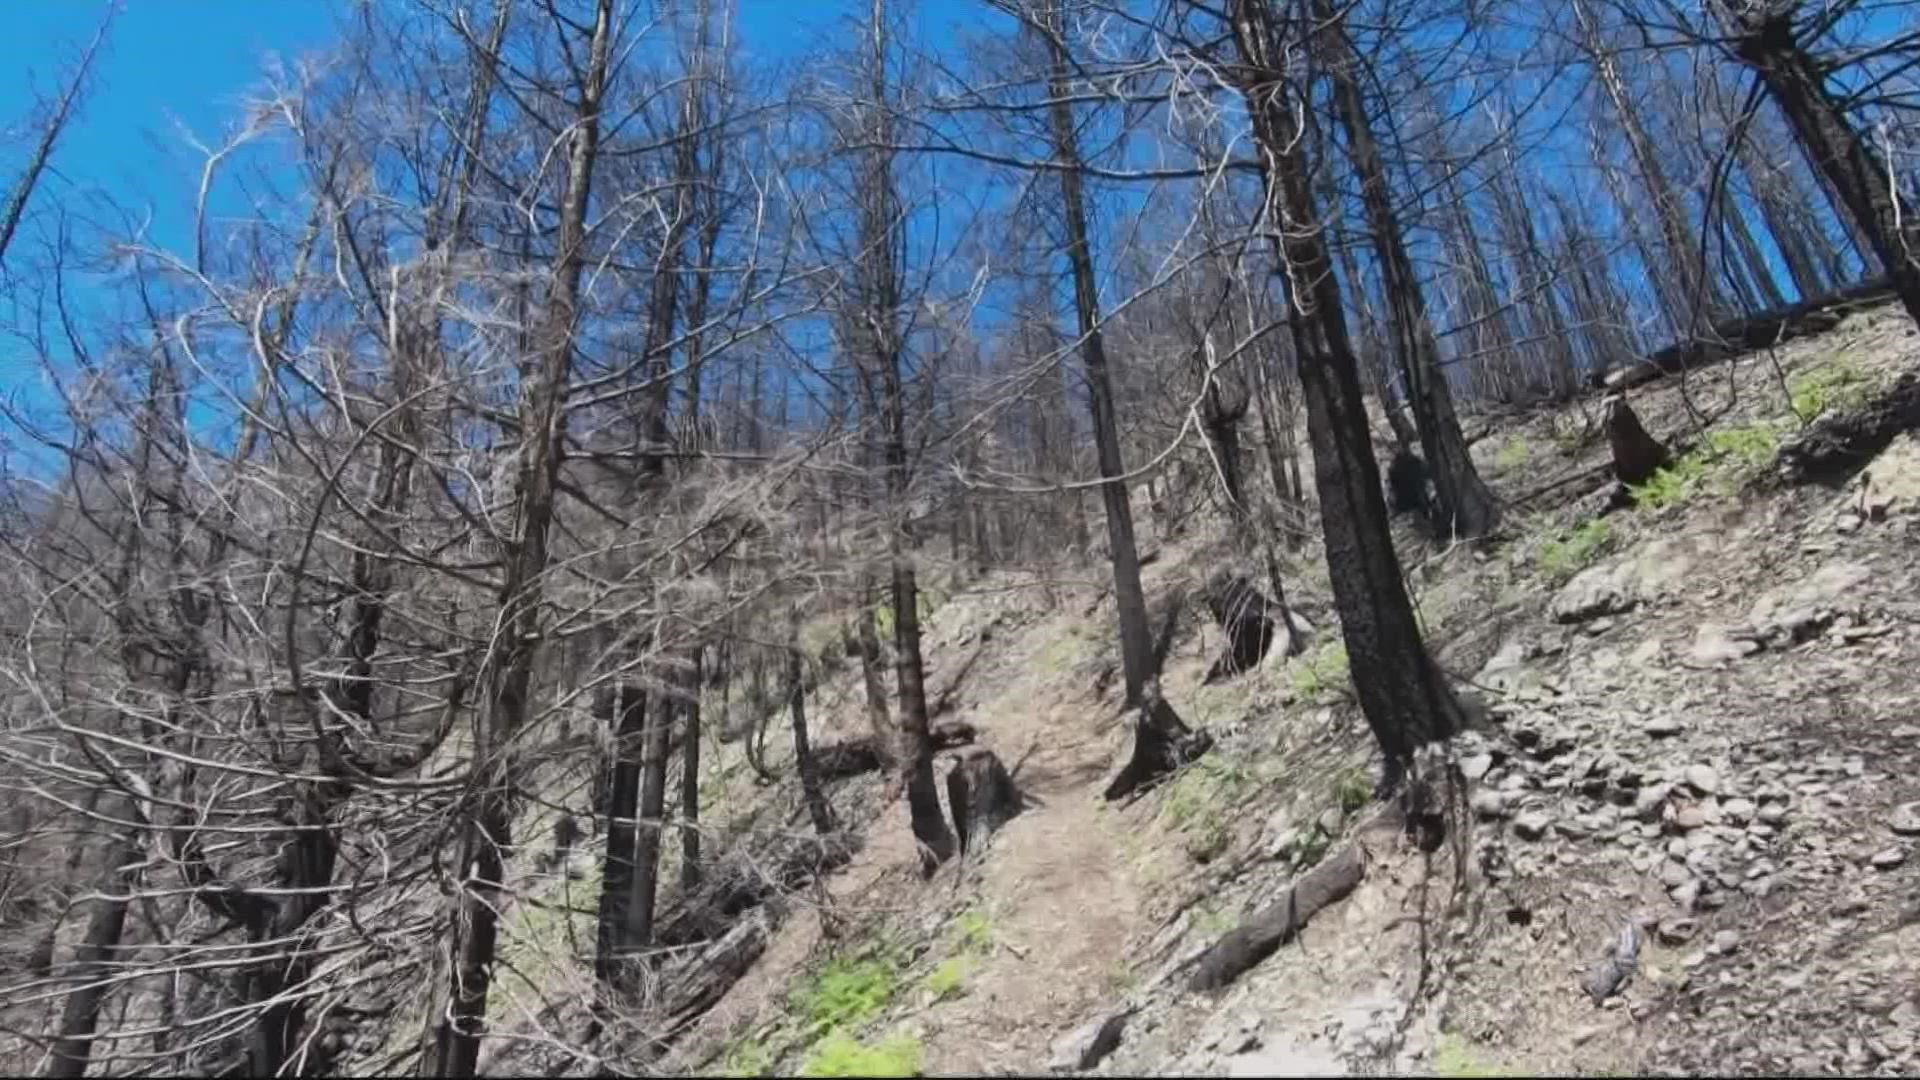 The conservation nonprofit American Forests made the donation. Last year, the Beachie Creek Fire burned about half of the trees in the Santiam State Forest.